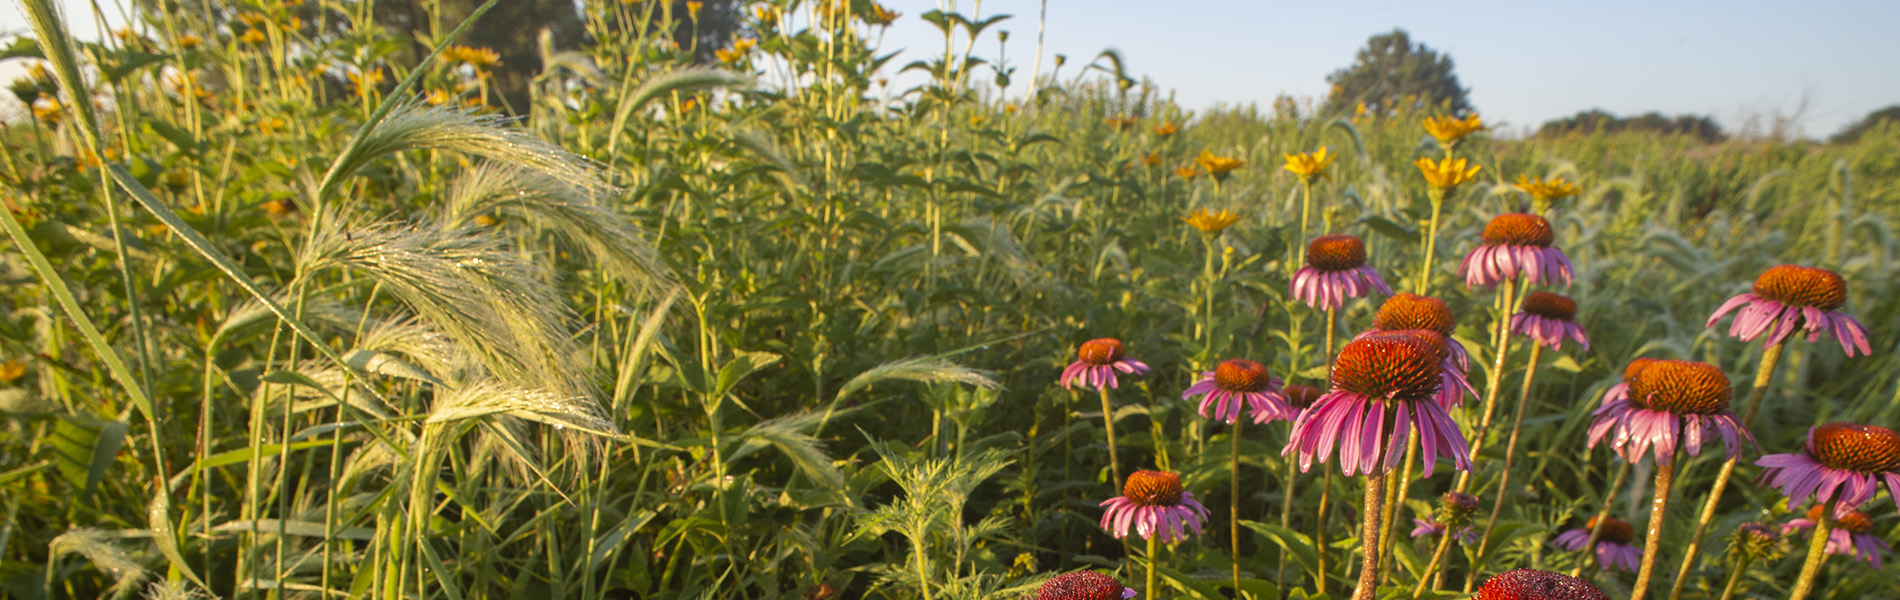 Purple coneflower grows among other grasses and wildflowers in tallgrass prairie.